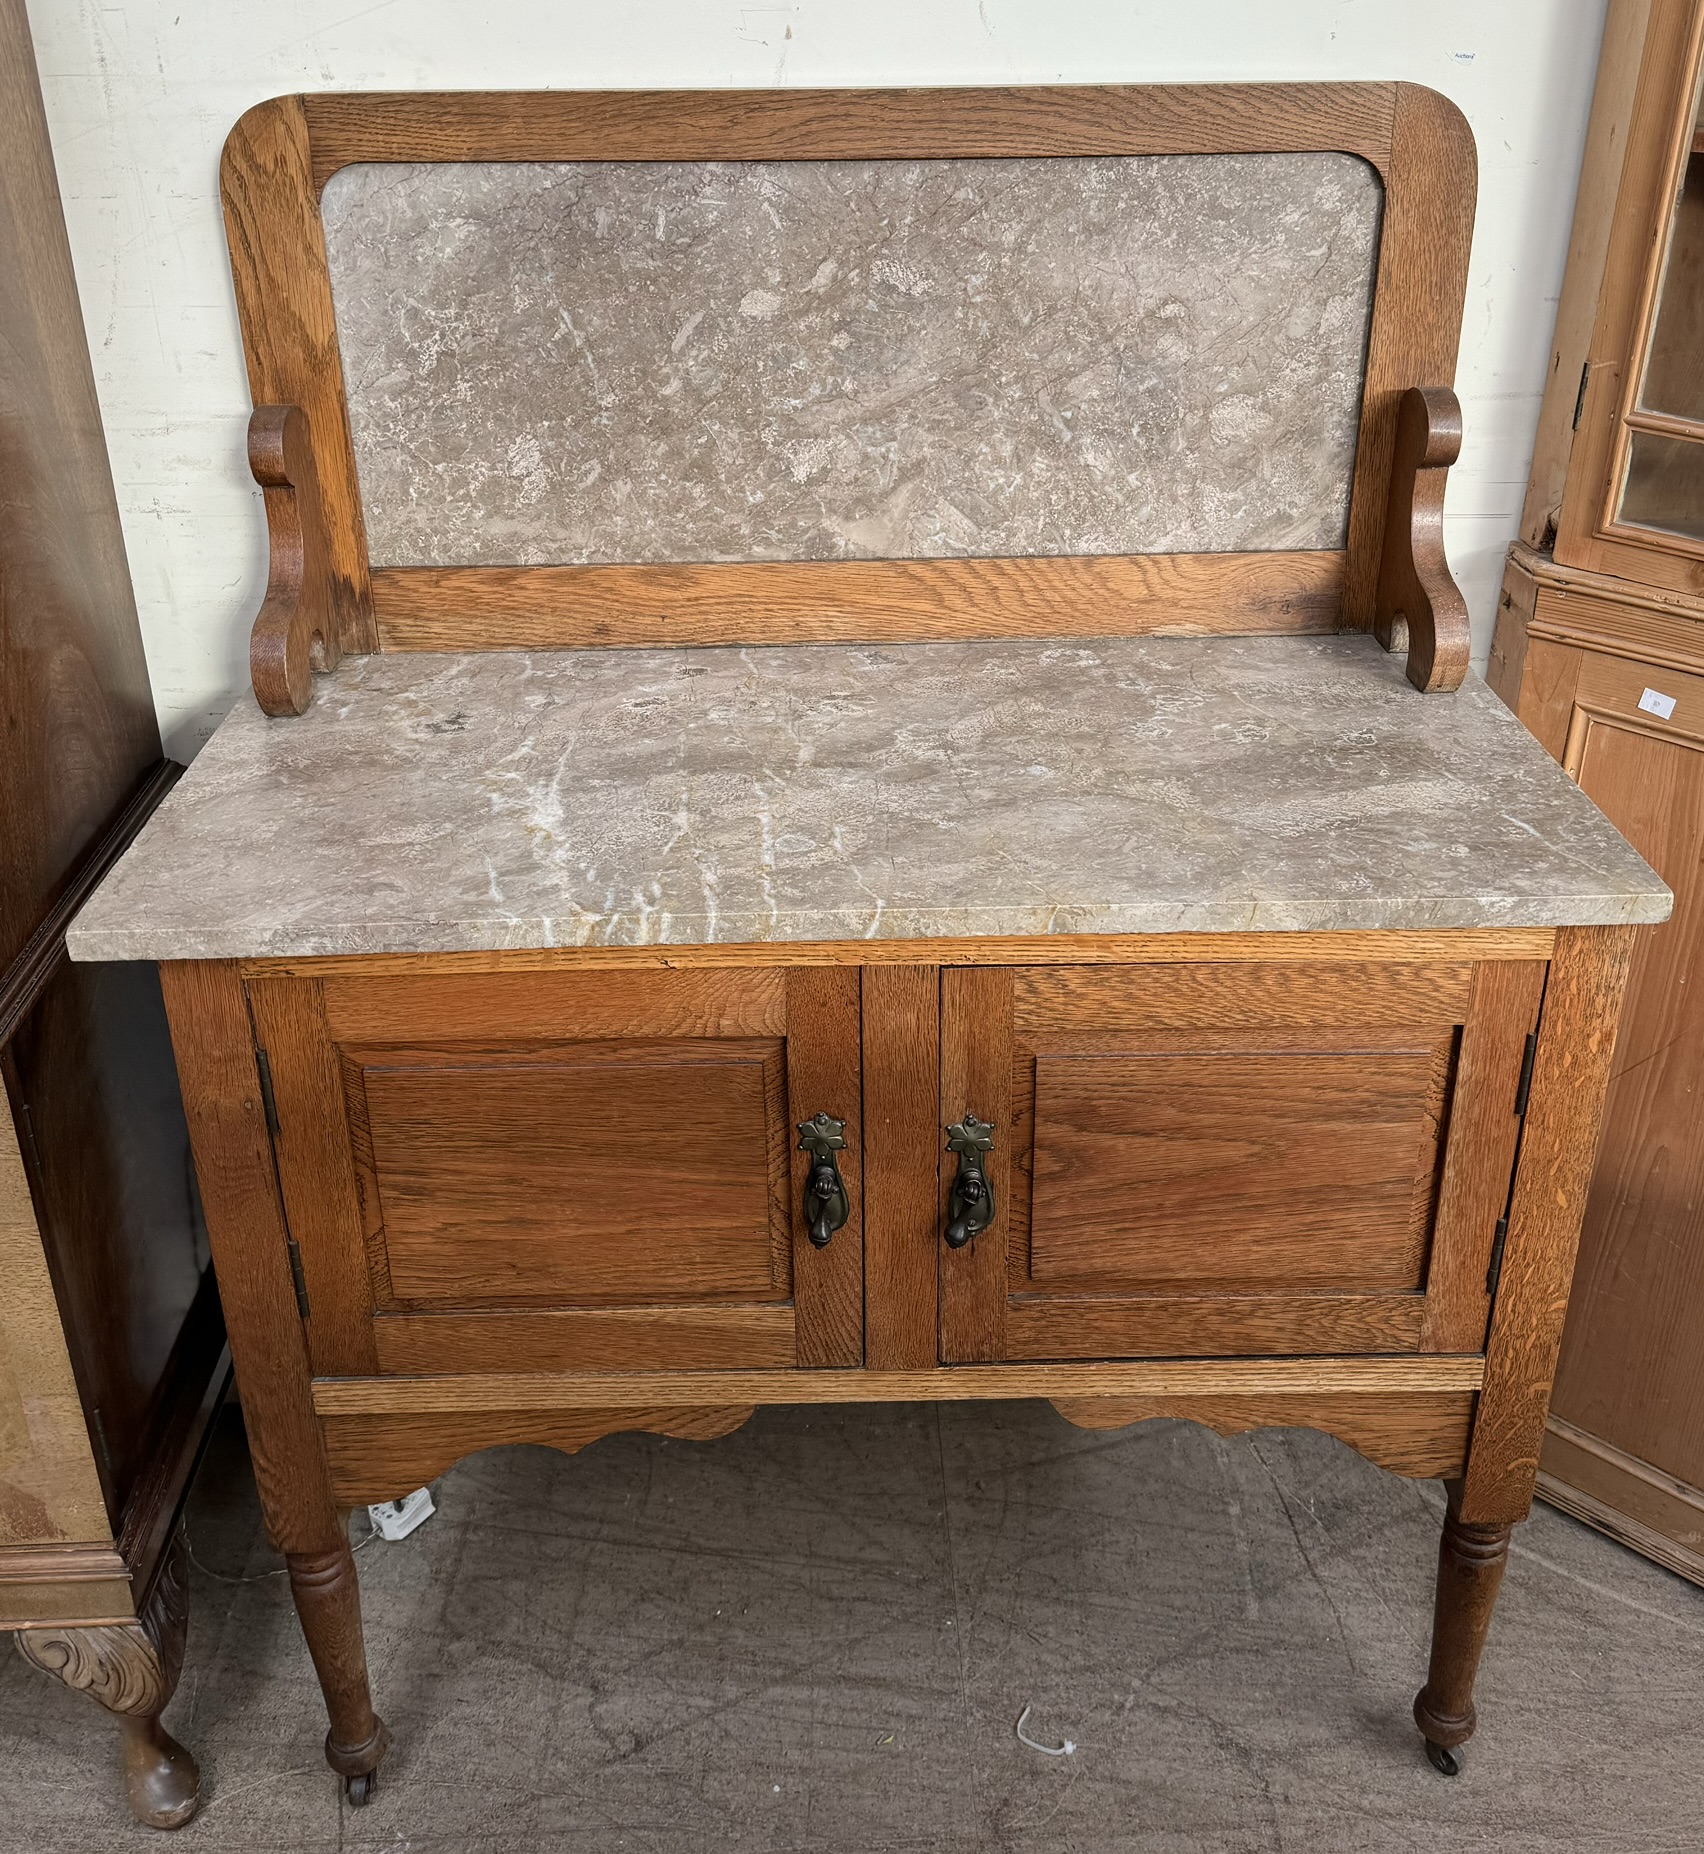 An Edwardian Marble top washstand with a pair of cupboard doors on turned legs